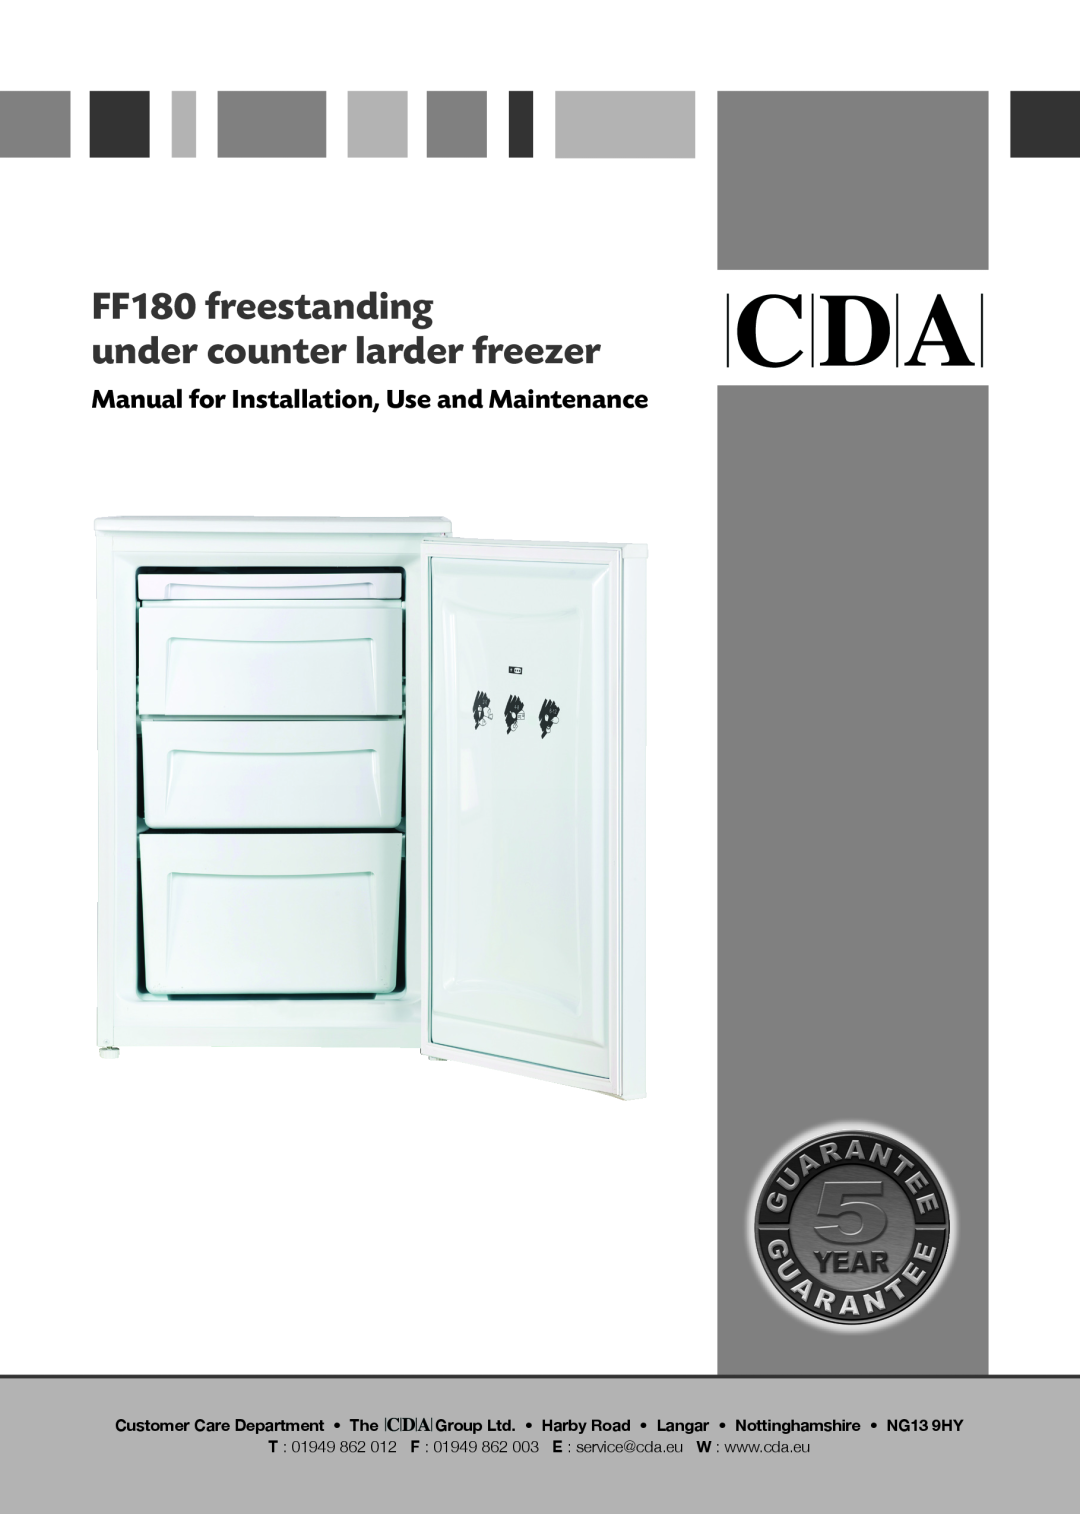 CDA manual FF180 freestanding under counter larder freezer, Manual for Installation, Use and Maintenance, T 